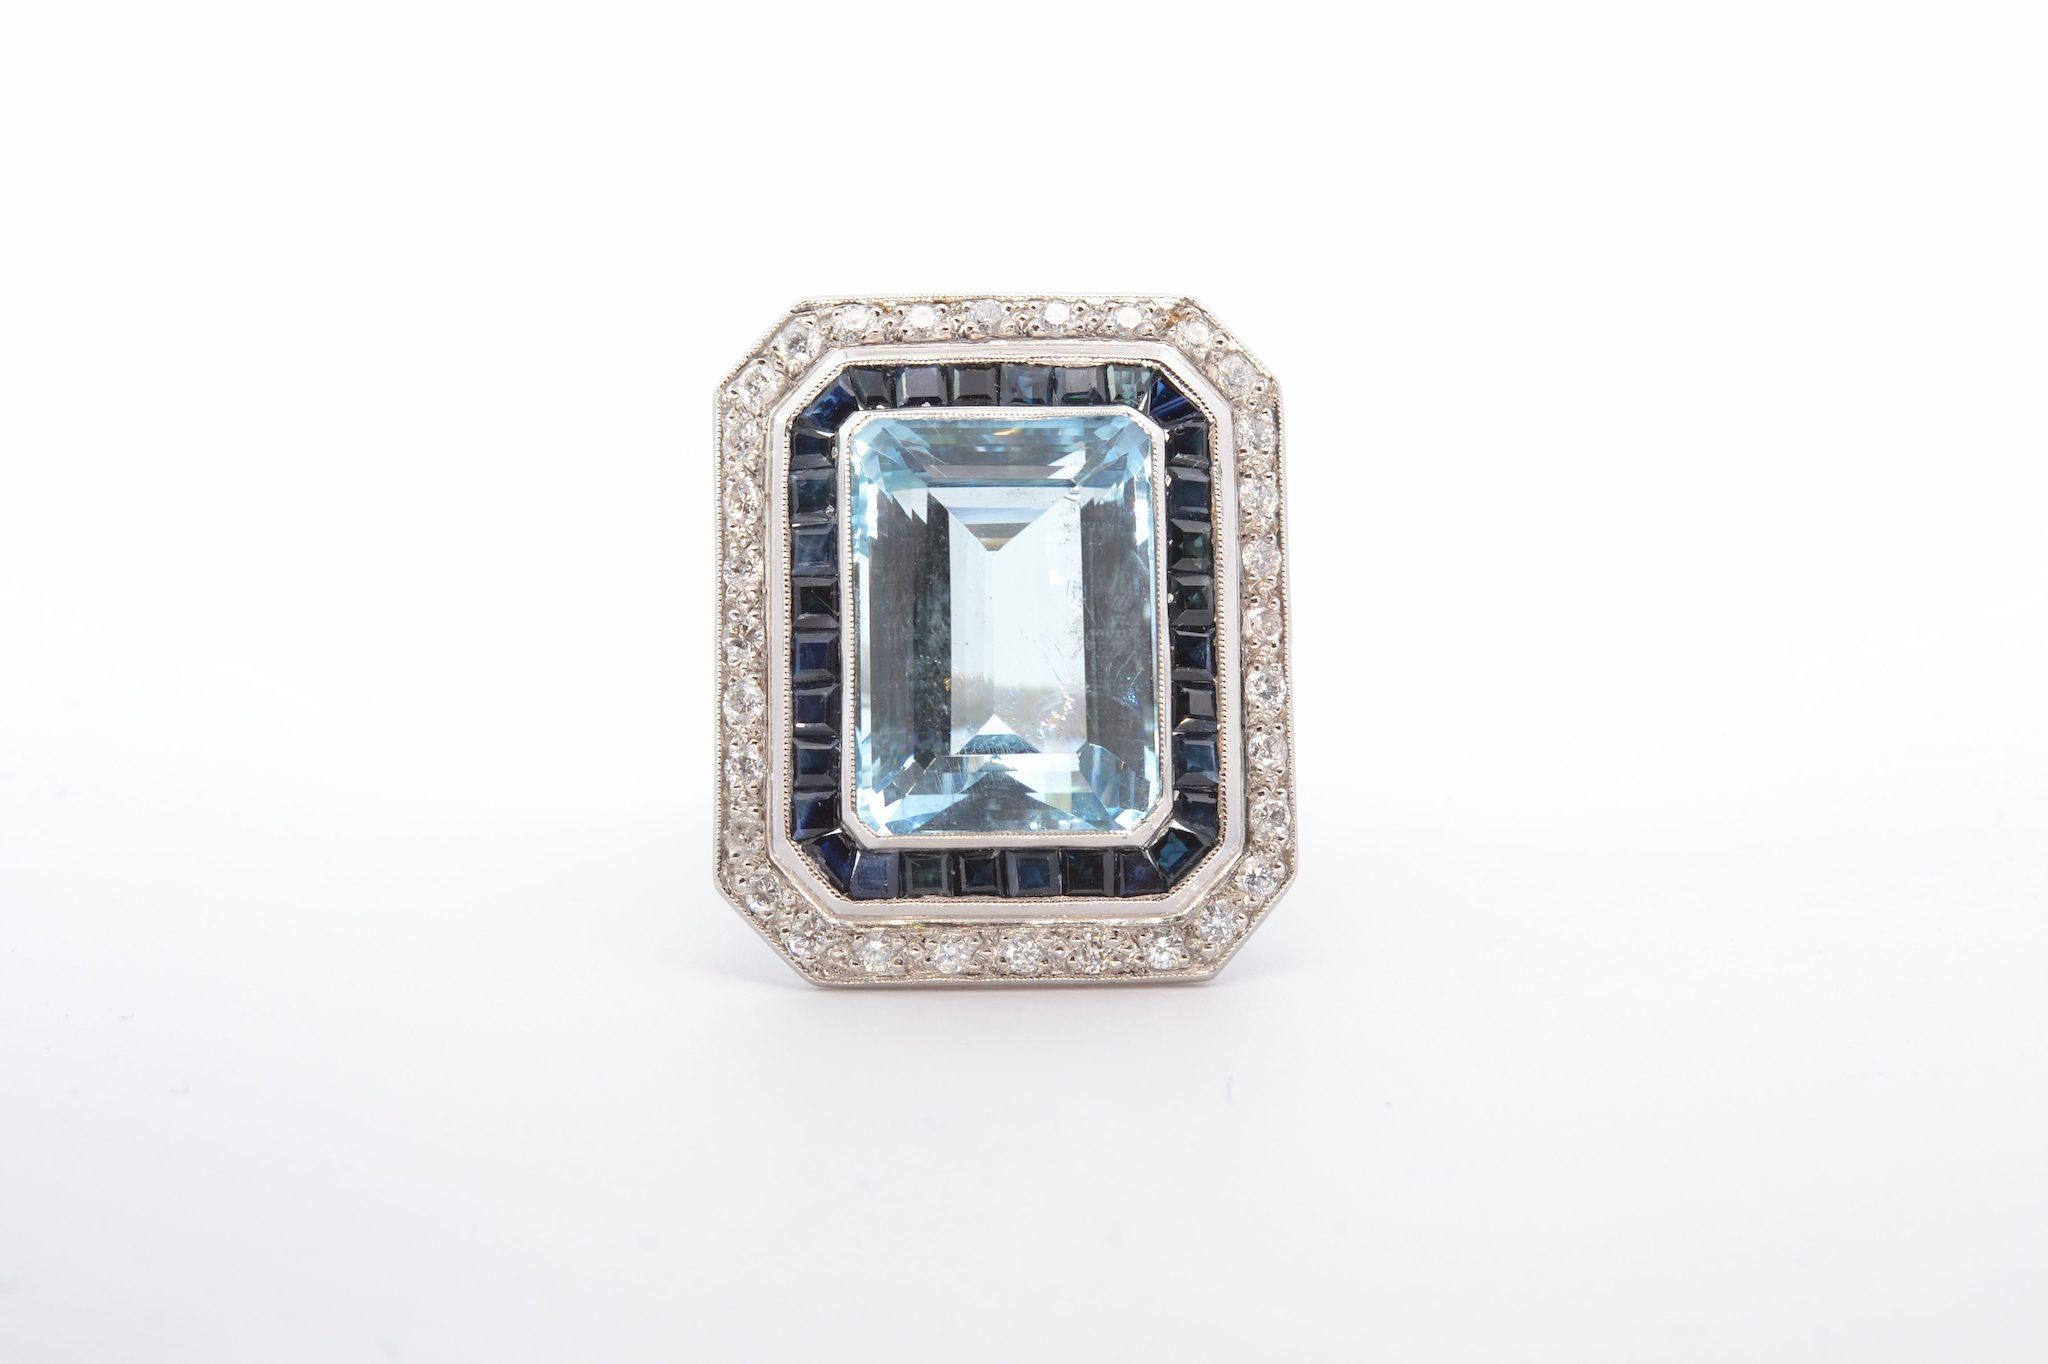 Stones: Aquamarine: 22.5cts, 32 sapphires: 3.20cts, 32 diamonds: 0.90ct
Material: Platinum
Dimensions: 30mm x 24mm
Weight: 19.5g
Period: 1950
Size: 60 (free sizing)
Certificate
Ref. : 25075